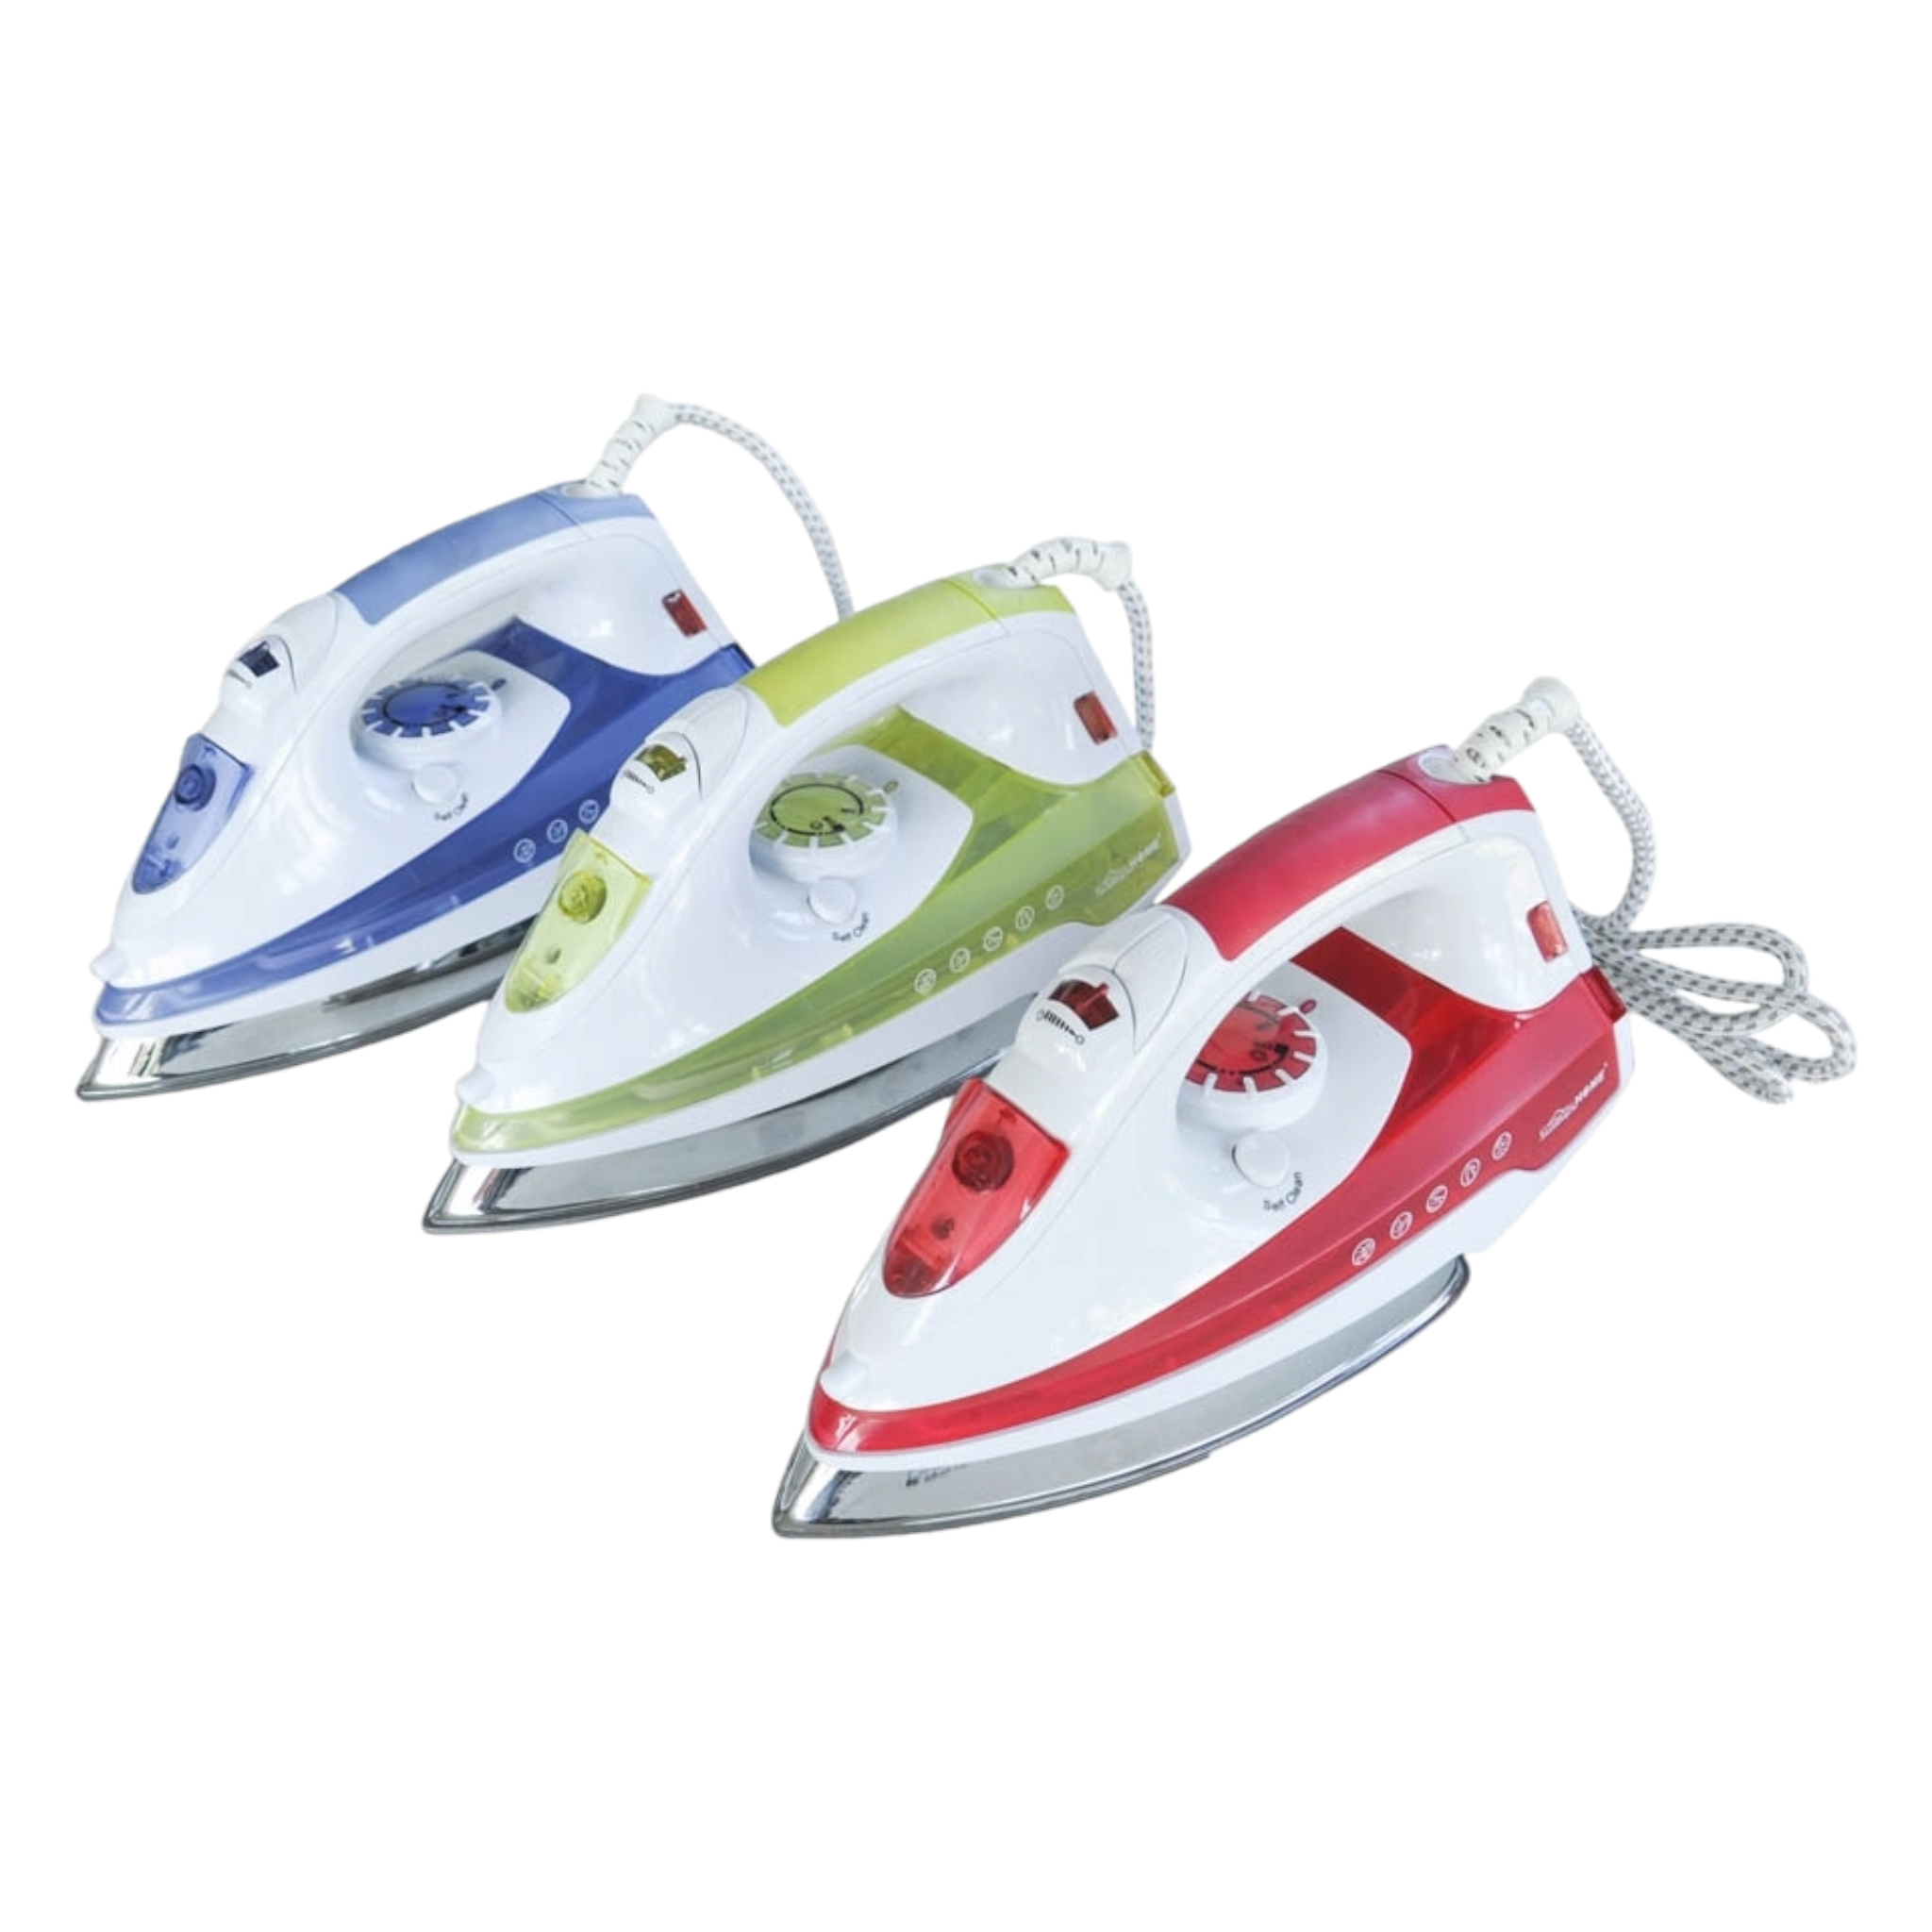 Totally Home Steam Iron TH170